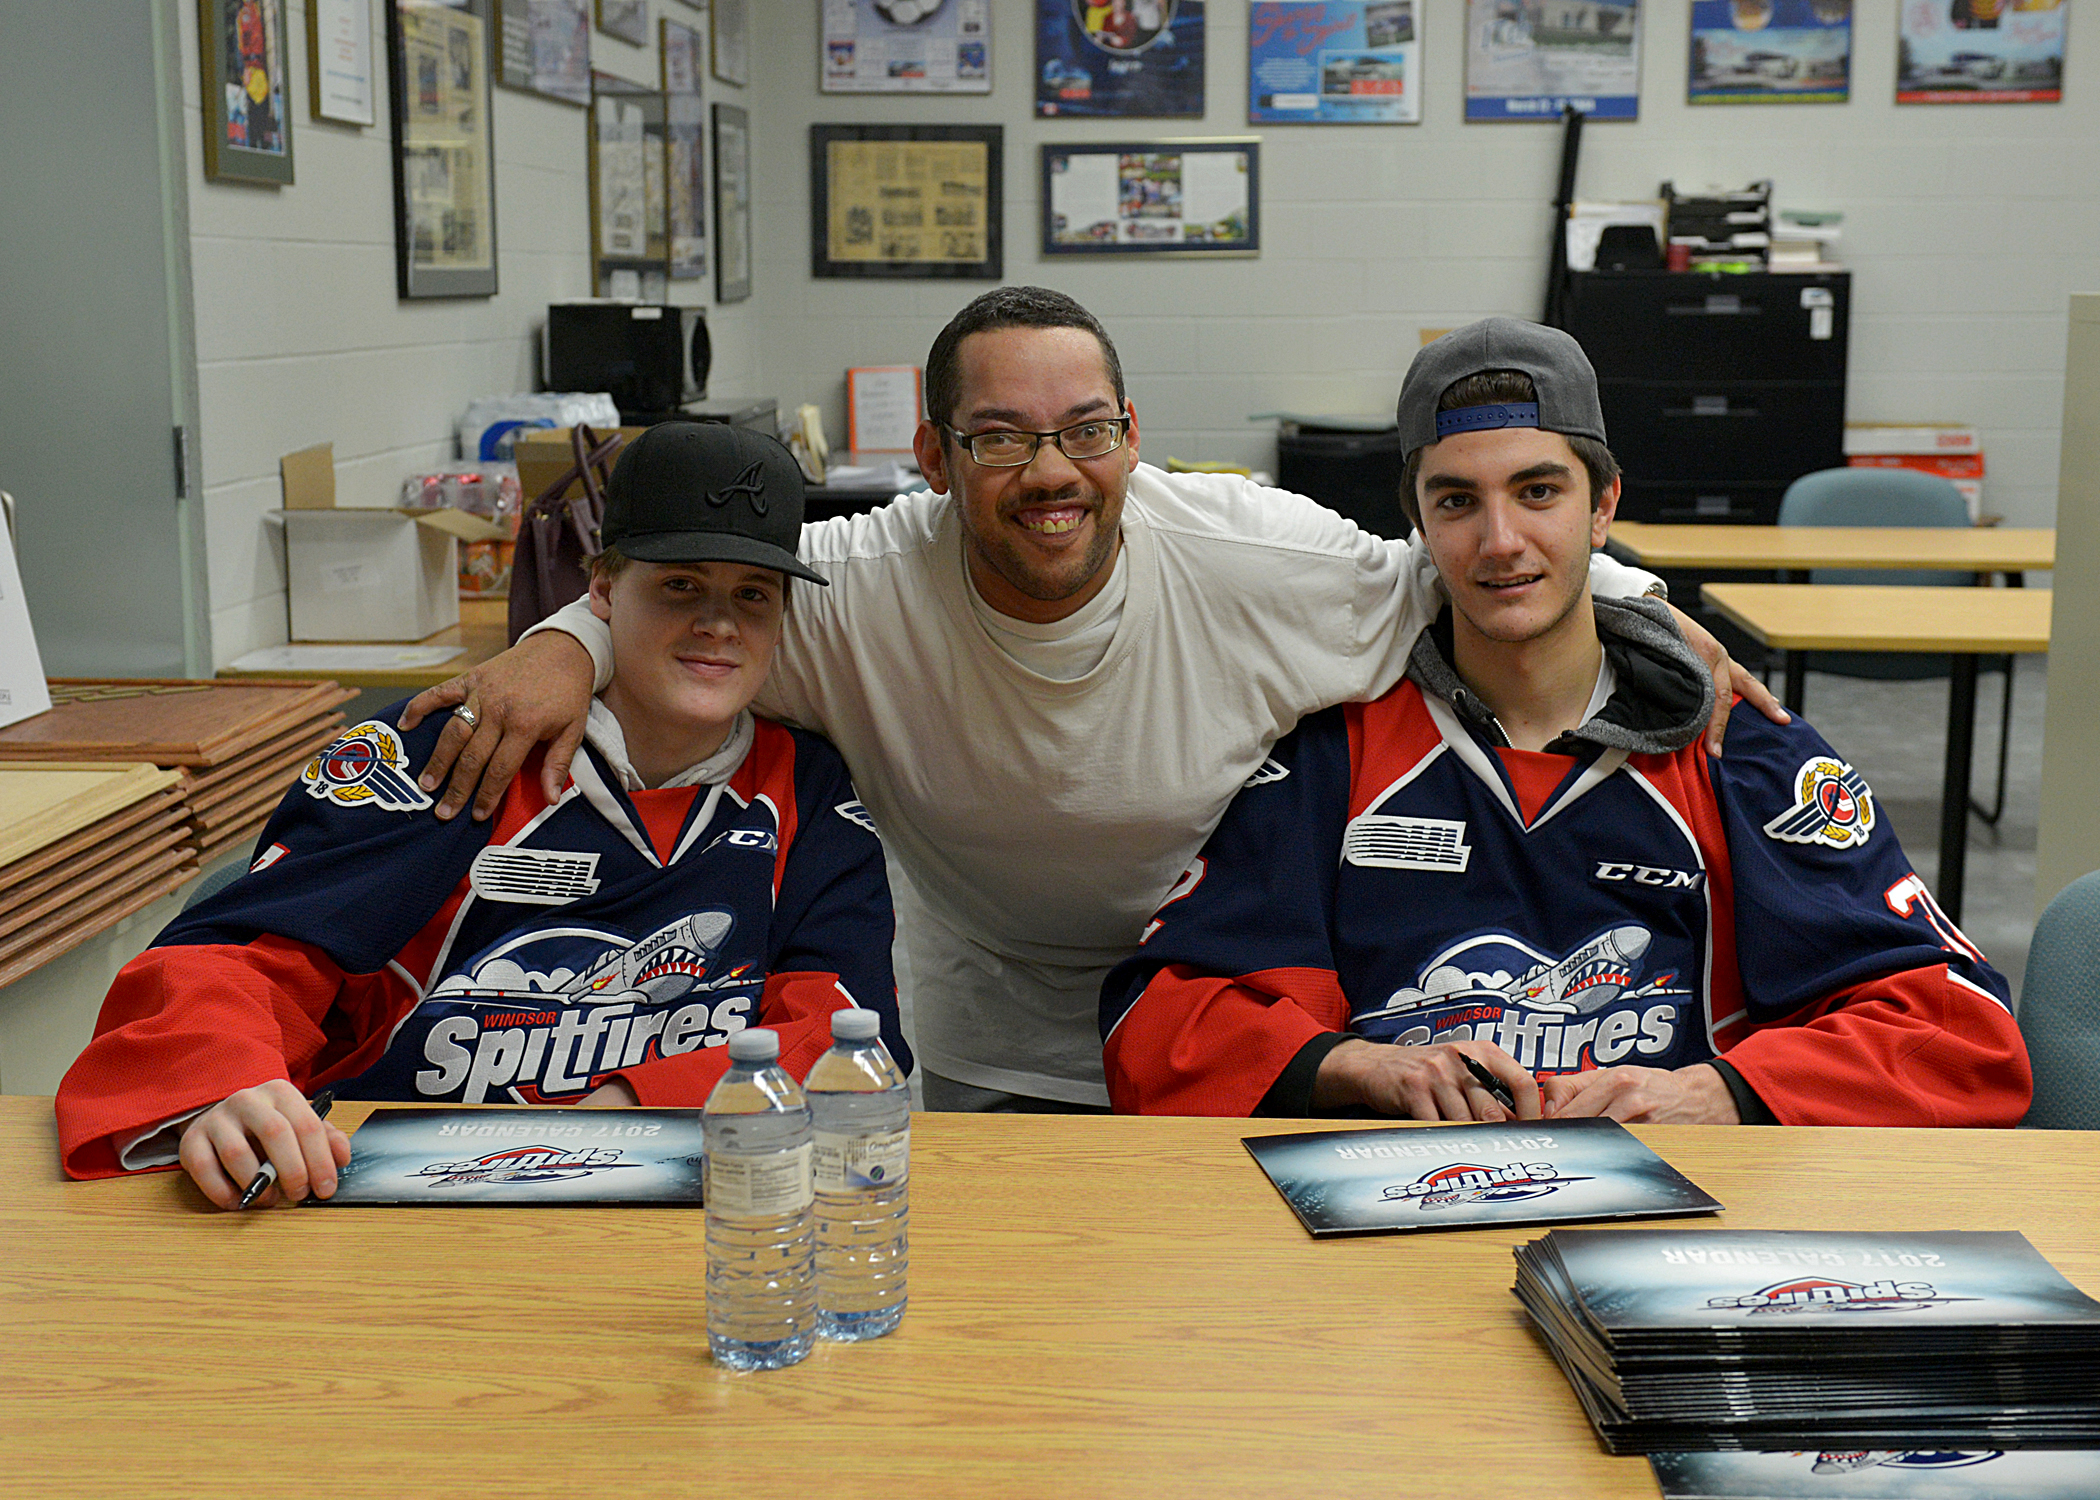 Theo Godden and Spitfires players in ICHA office